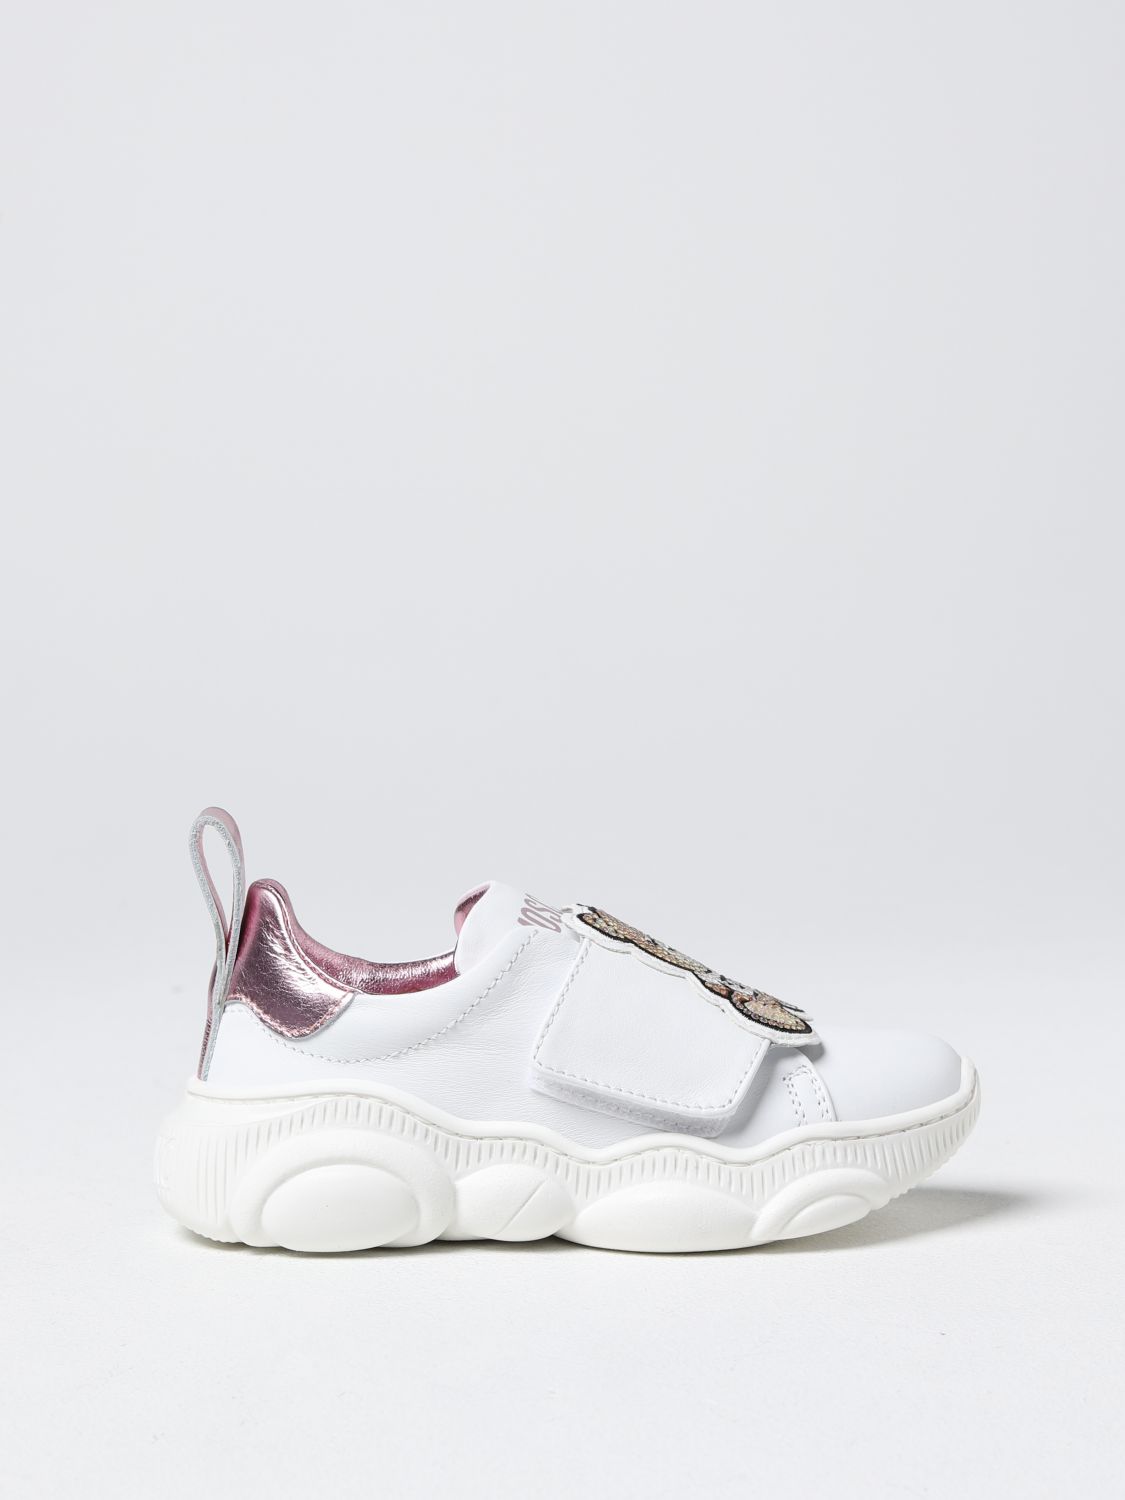 Moschino Kid Shoes  Kids Color White